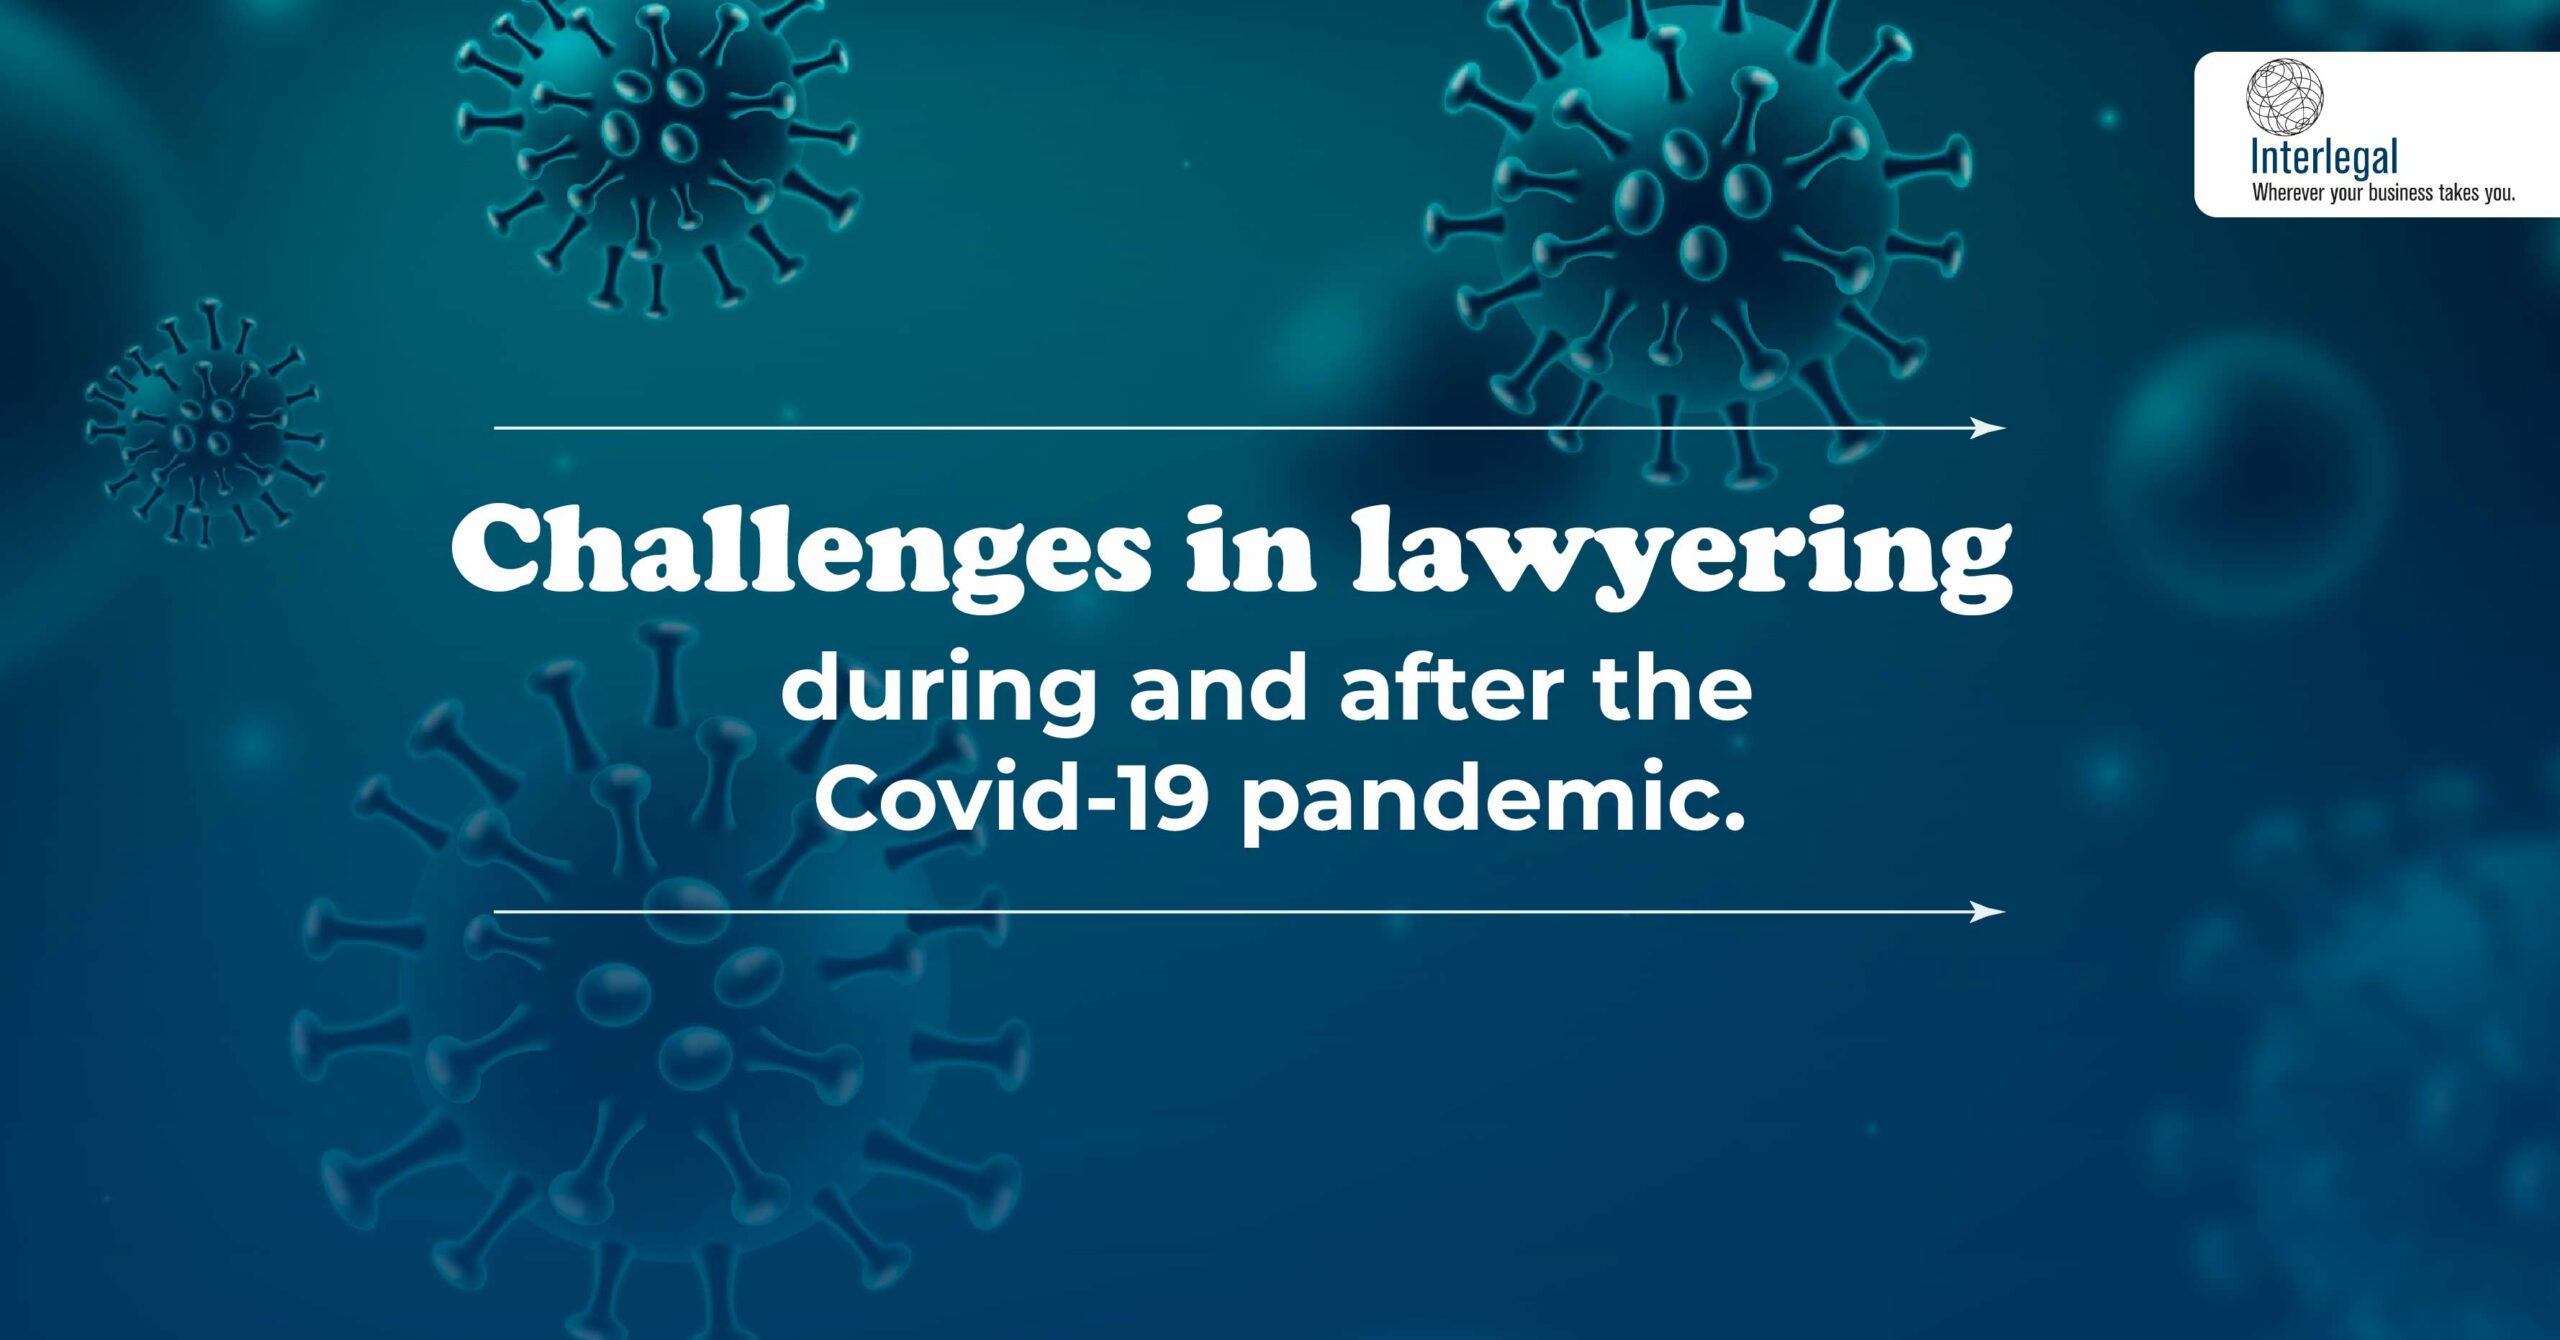 Challenges in lawyering during and after the Covid-19 pandemic, and Long Covid-19 consequences of the pandemic in the Legal Profession